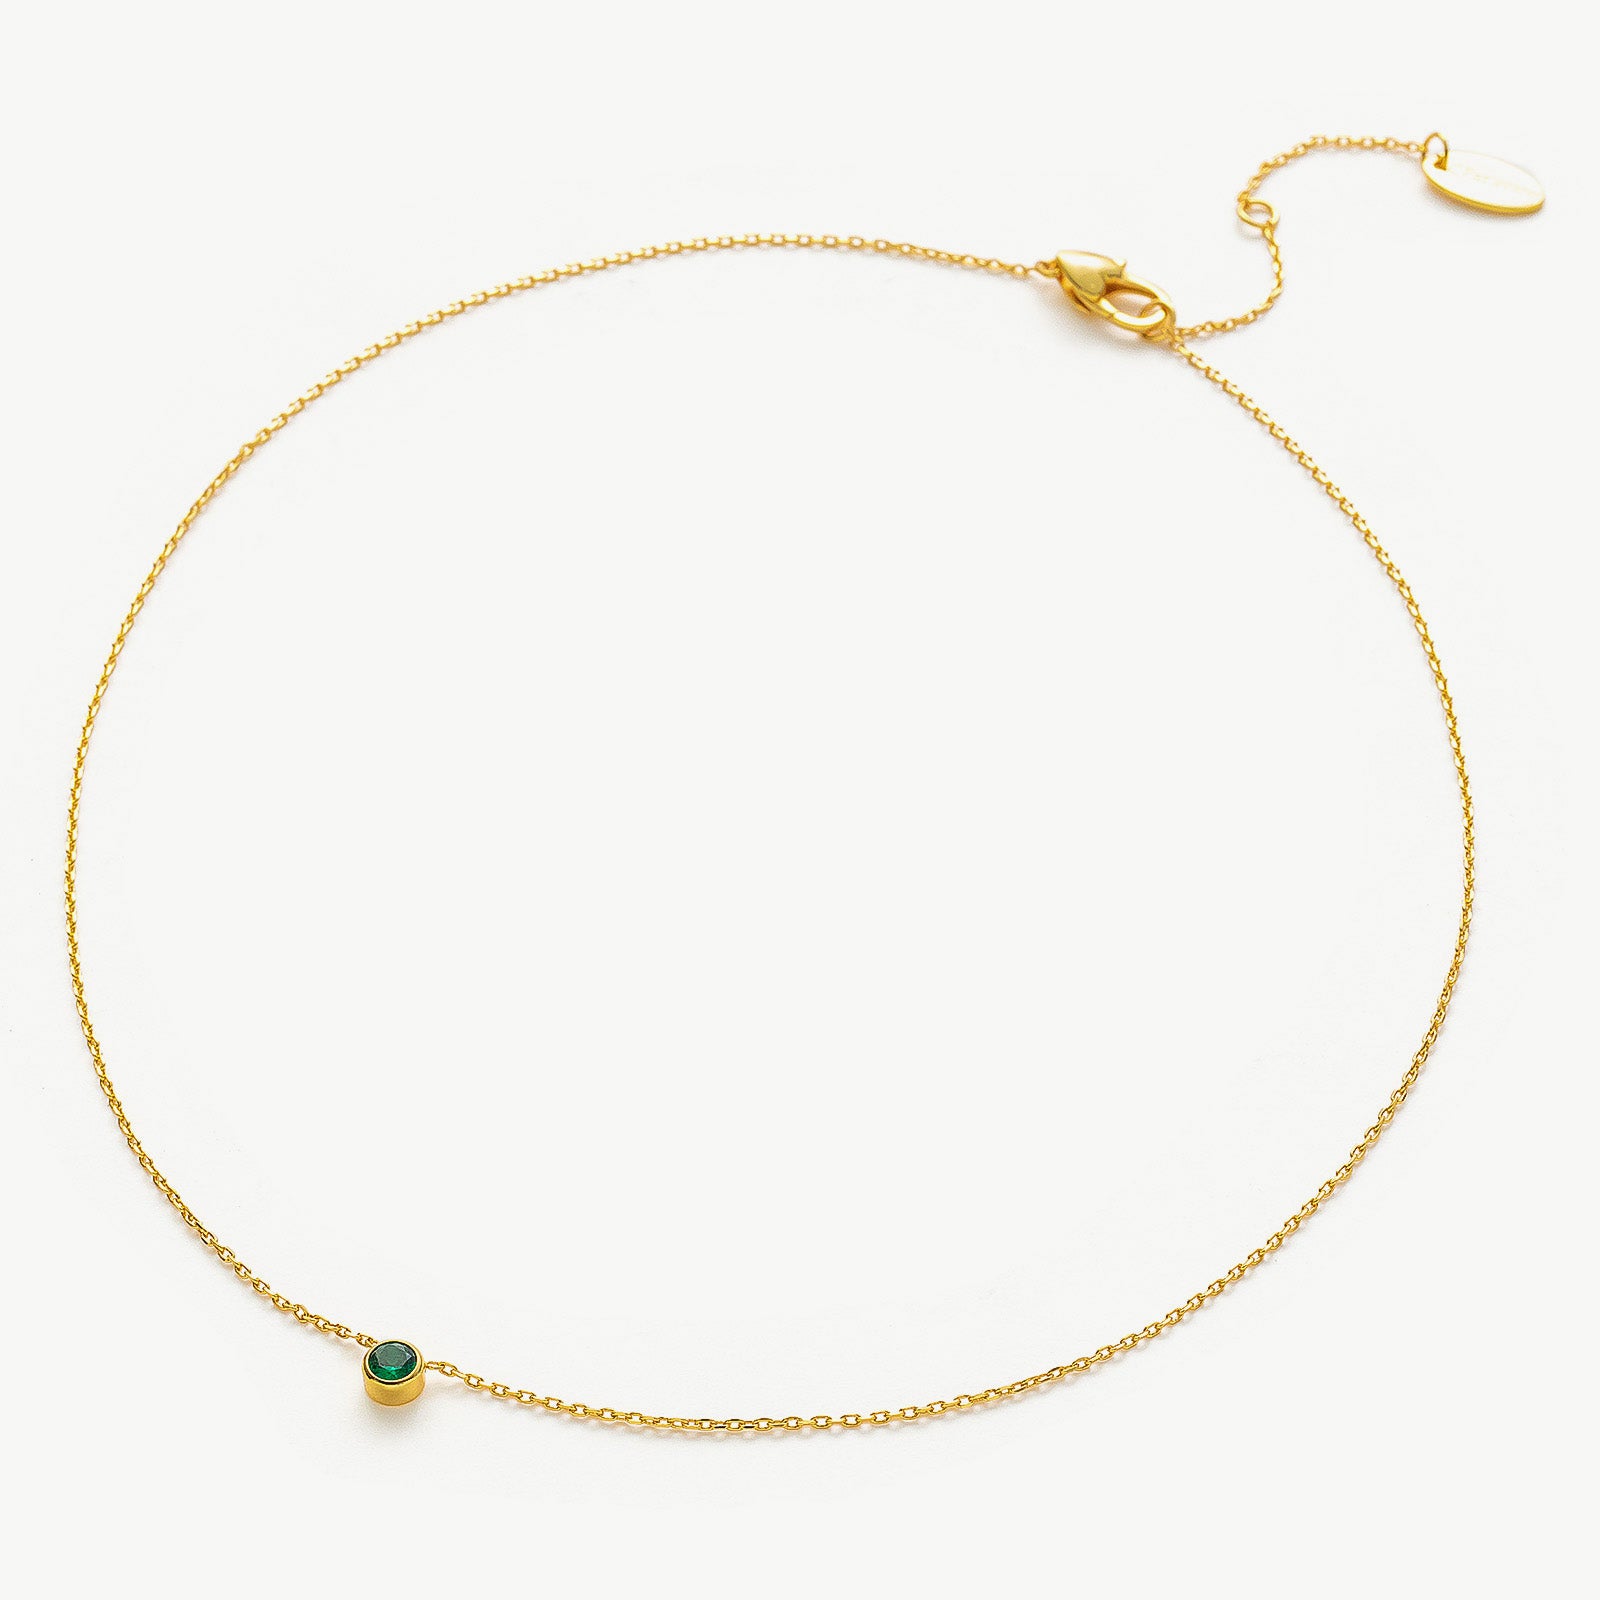 Gold Emerald Crystal Pendant Necklace, with luxurious emerald elegance, this necklace captures the allure of crystal in a vibrant green shade.